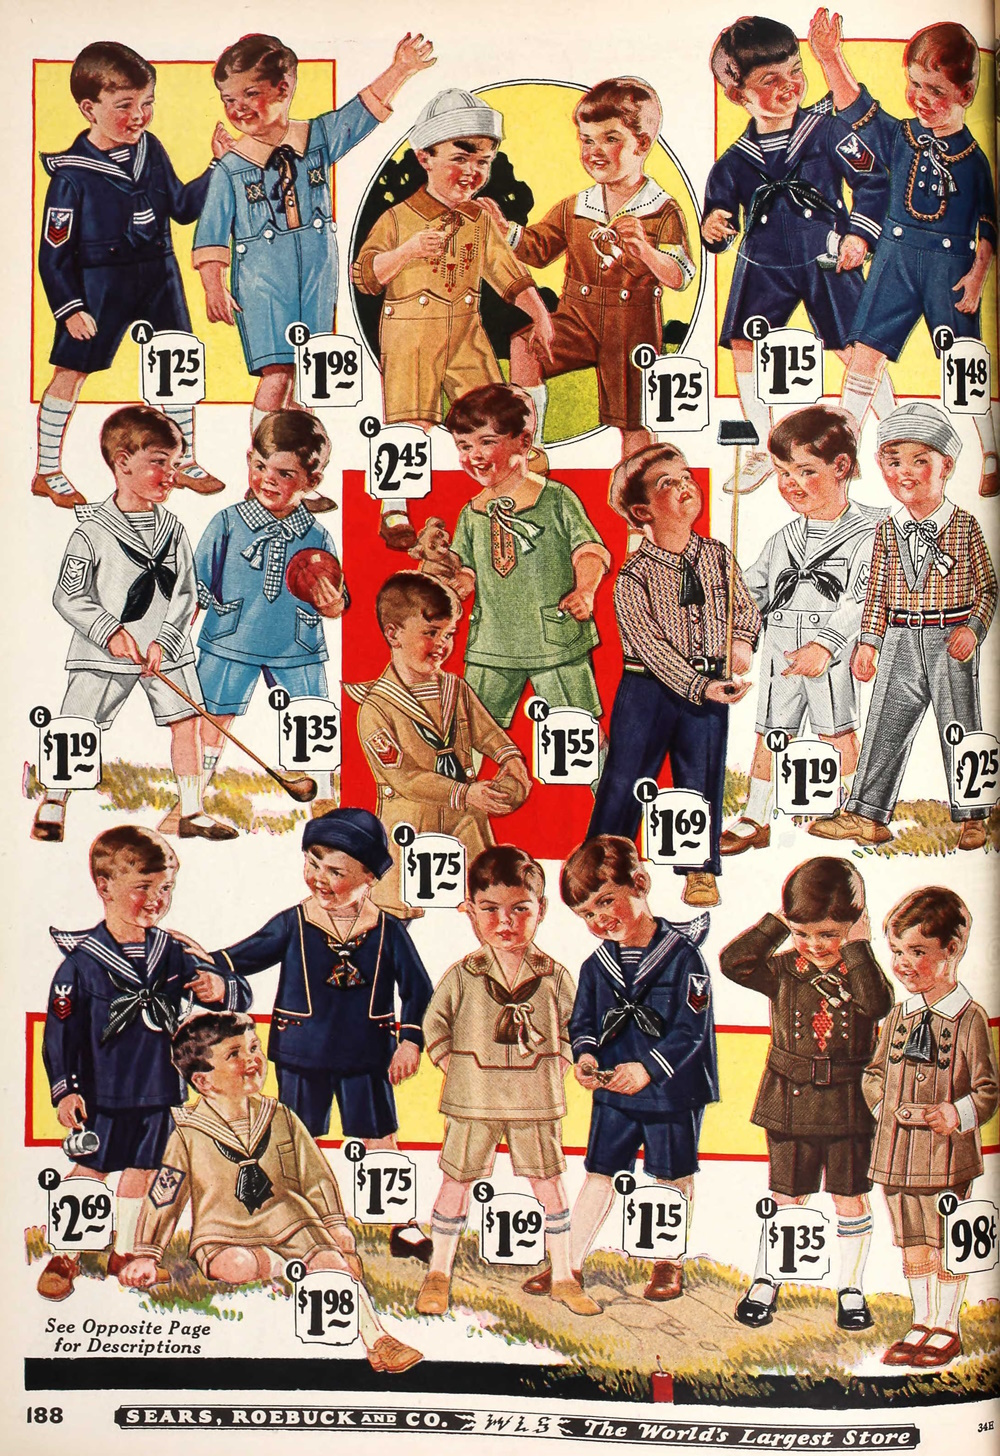 1926 boys toddlers 1000